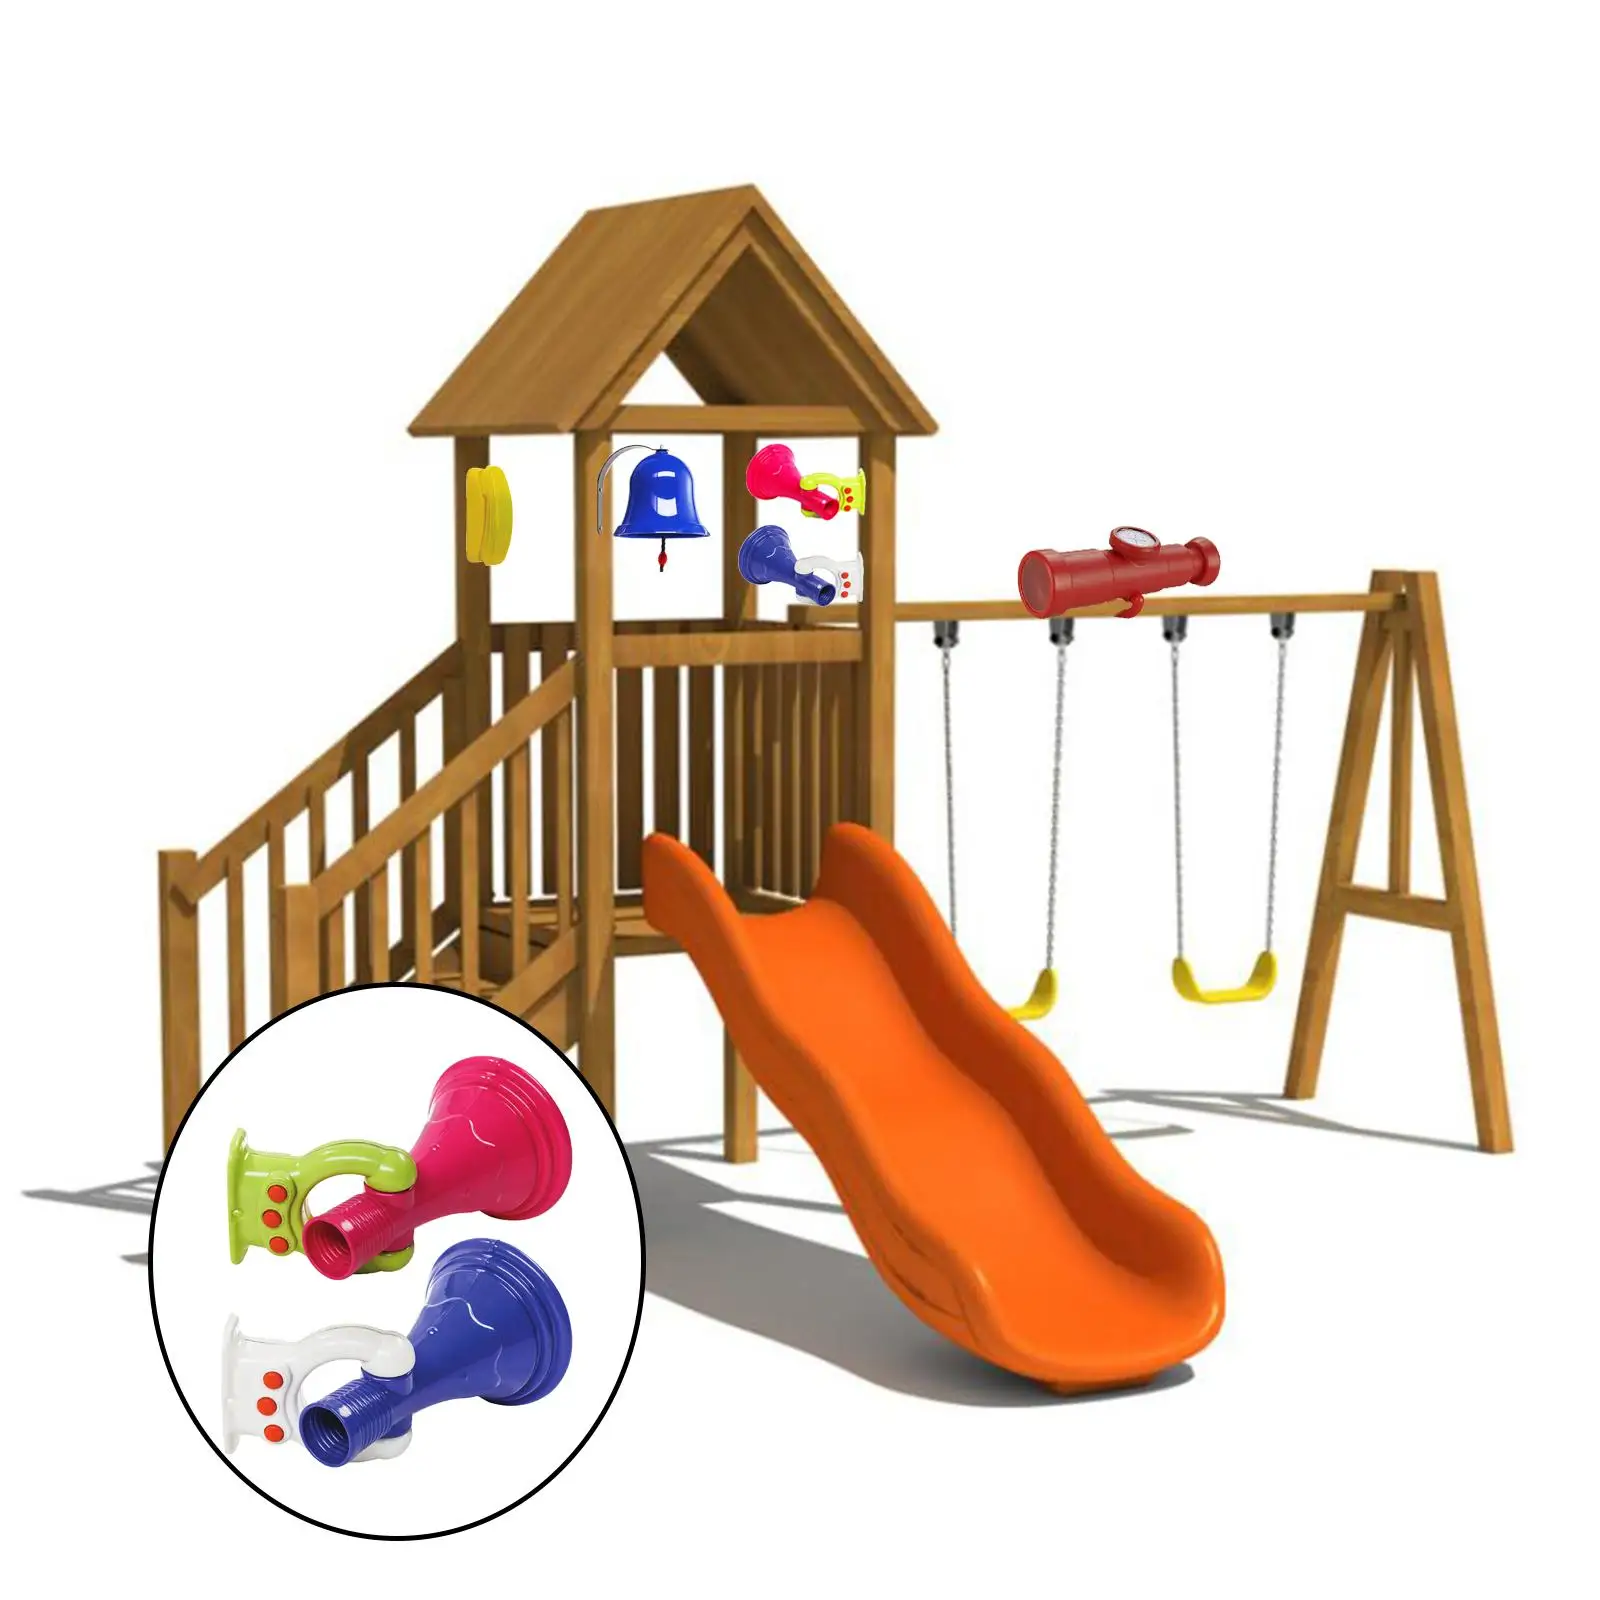 Kid Mounting Megaphone for Playgrounds Slides Fences Tree Houses Supplies